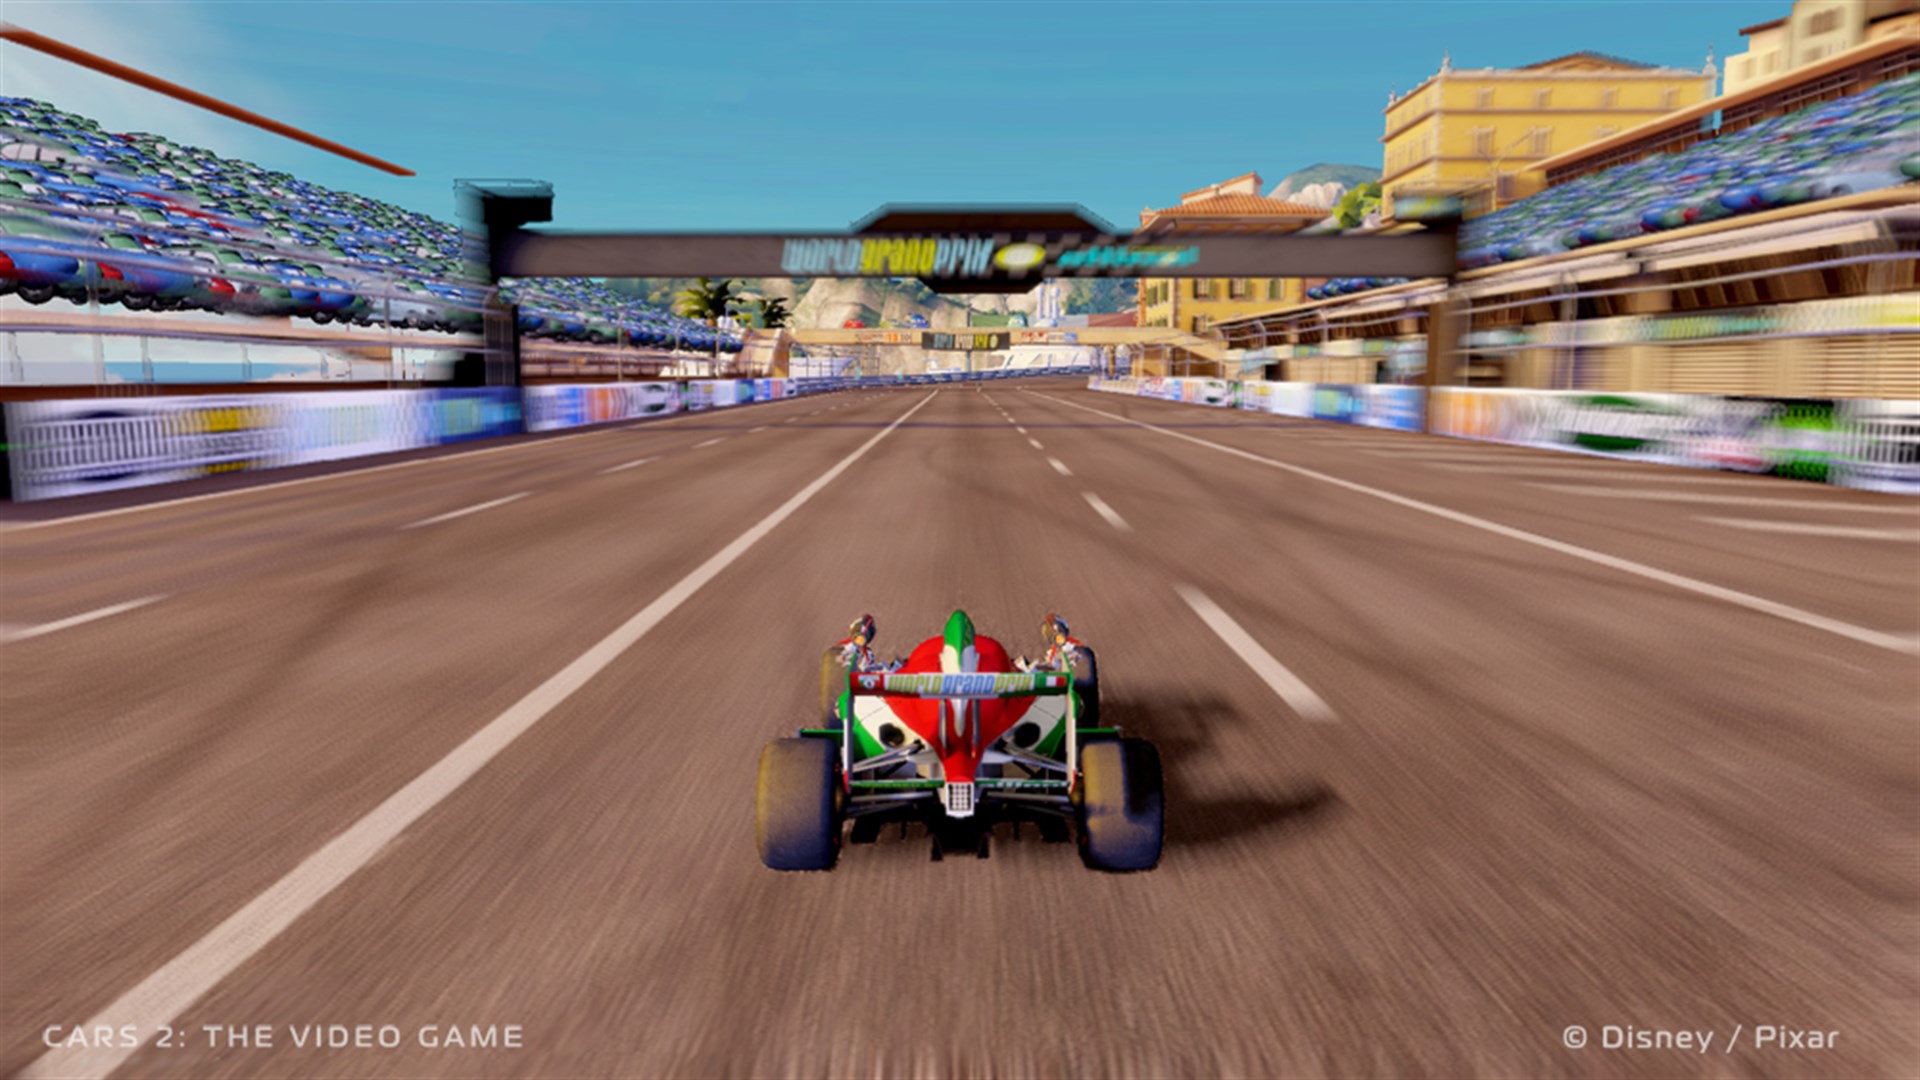 Гонки 2 игры 3. Cars 2 the videogame Xbox 360. Игра Disney Pixar cars 2. Cars 3 Xbox 360. Cars 2 the videogame ps3.